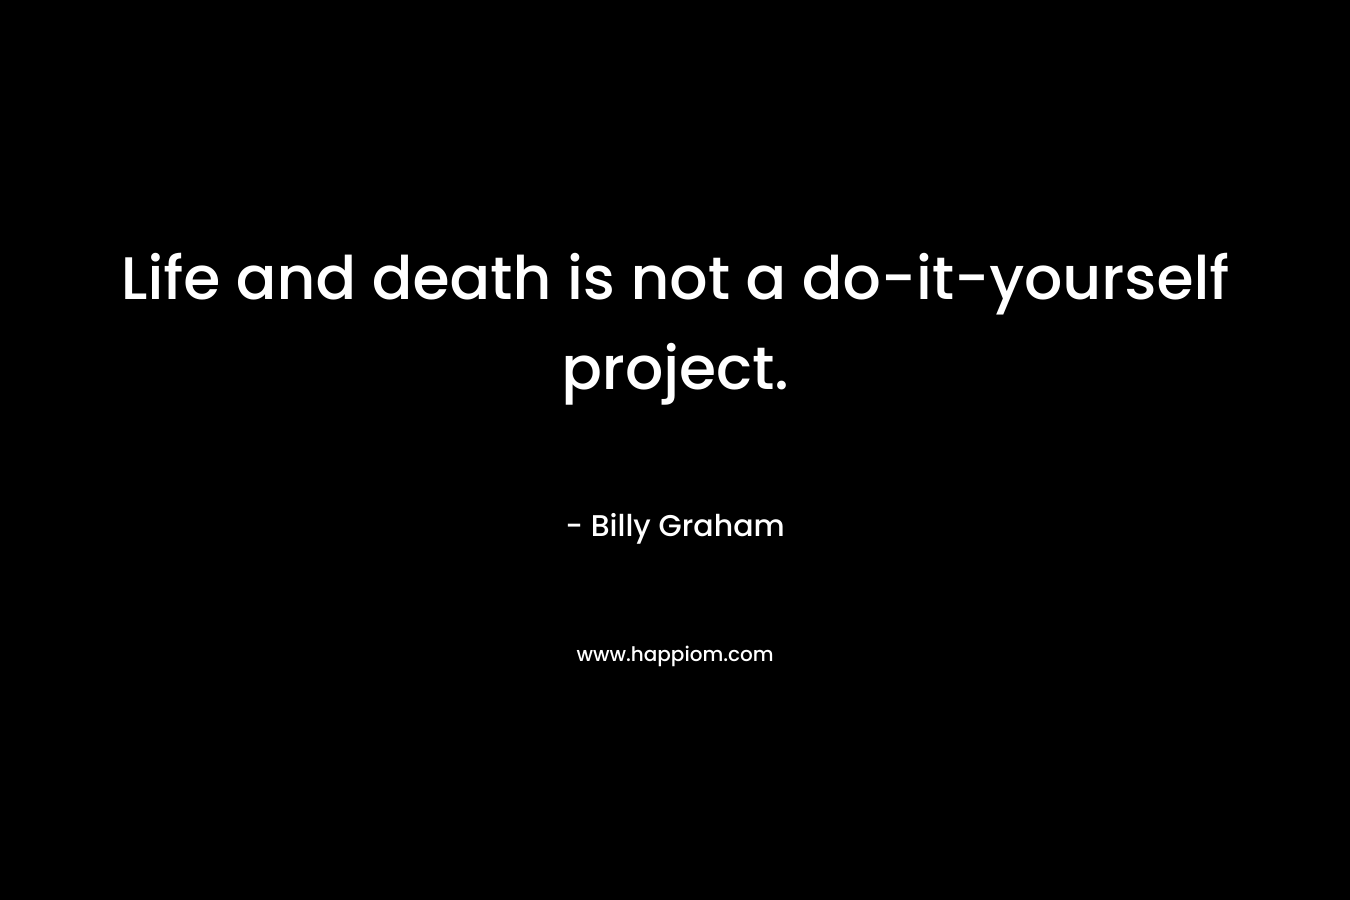 Life and death is not a do-it-yourself project. – Billy Graham